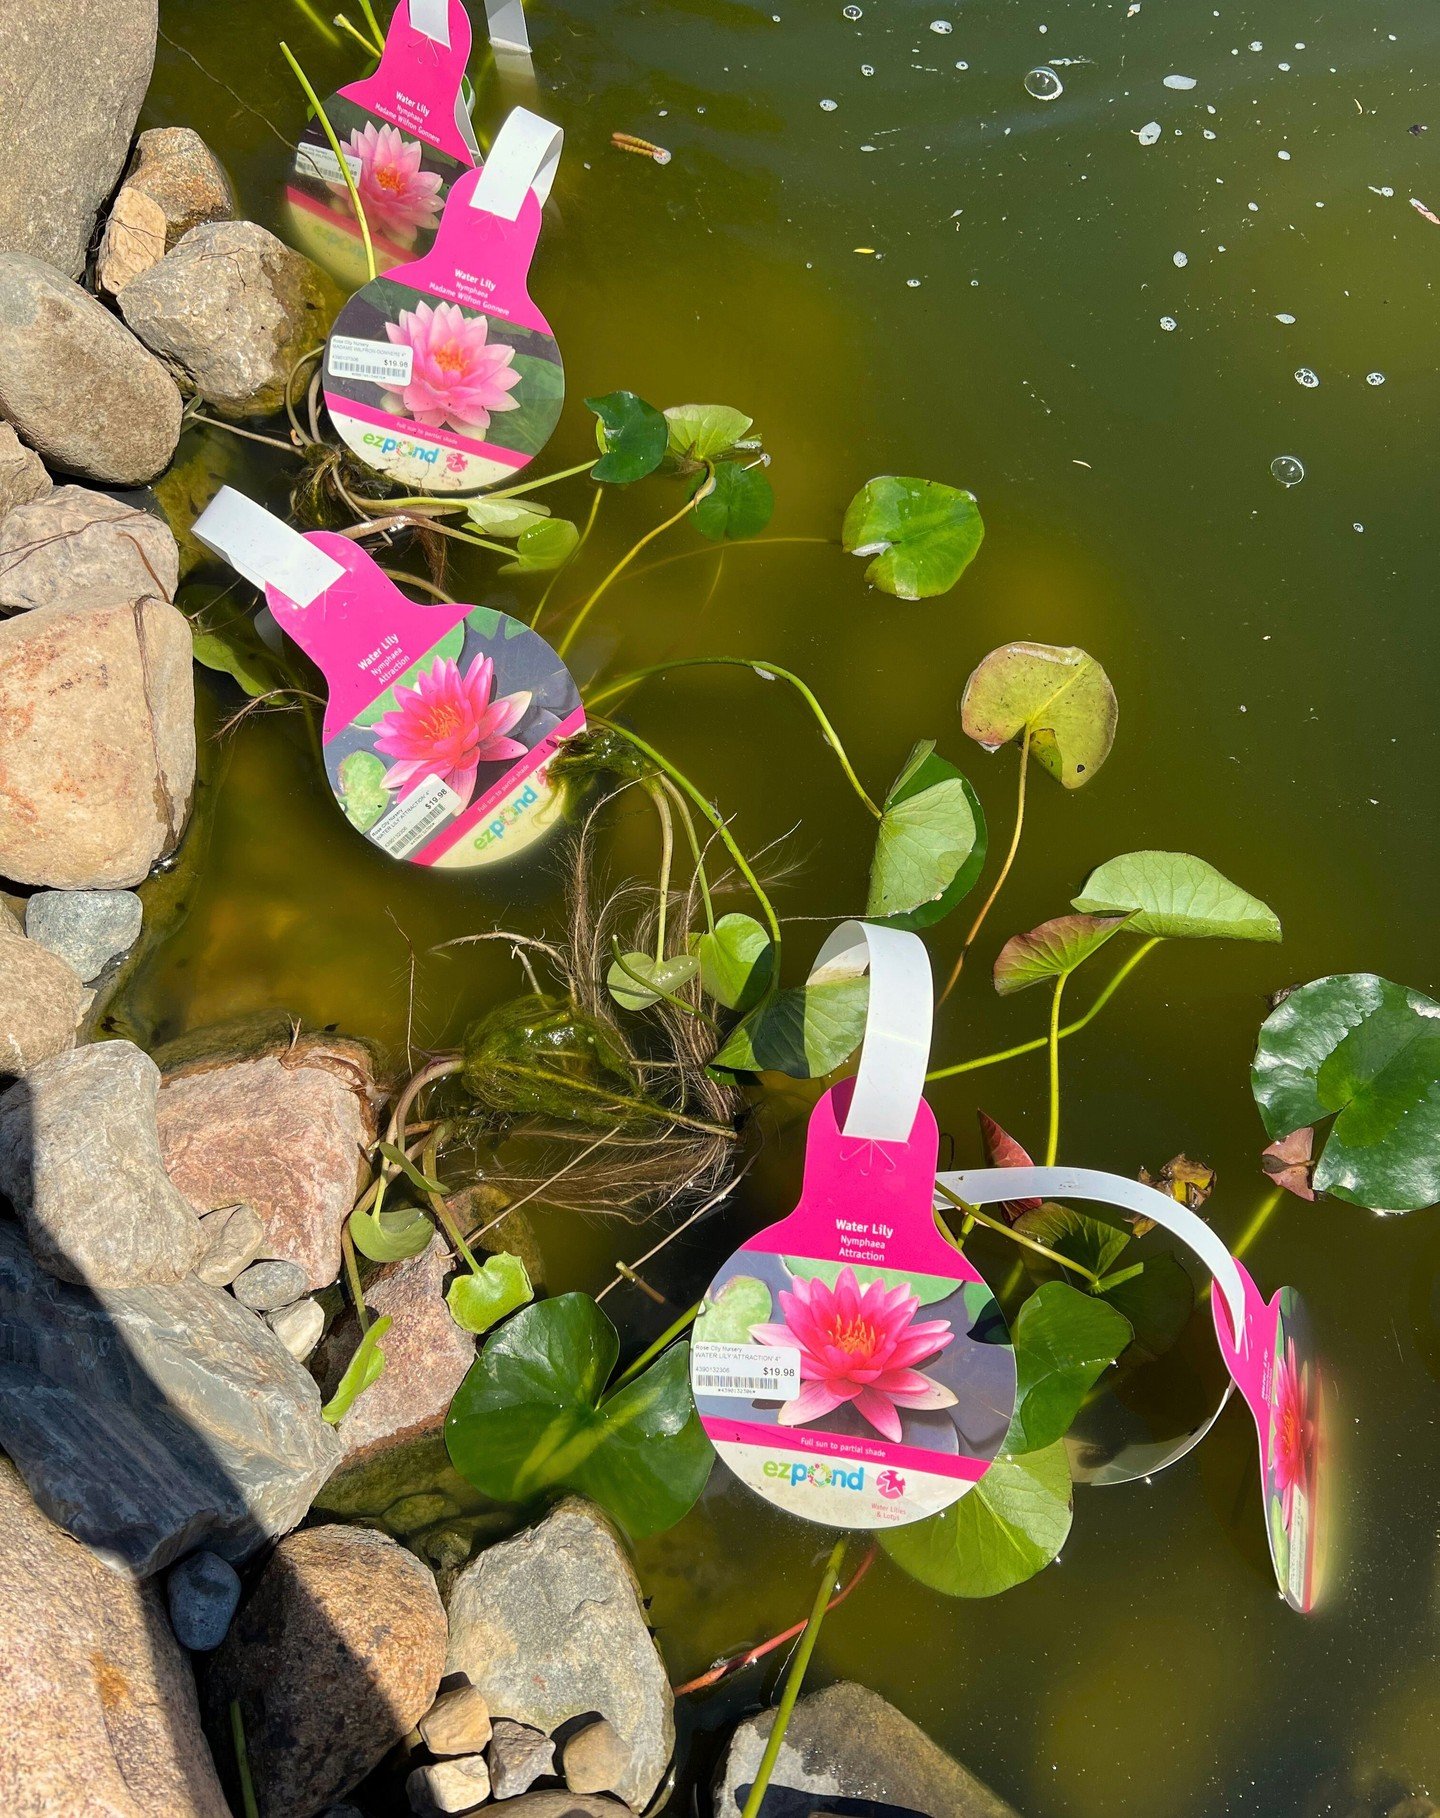 POND PLANTS ARE HERE! 🪷 Just in time for the weekend! Including water lilies, lotus, water lettuce, hyacinth, and more!

Open Monday-Saturday, 8-5

#pond #pondplants #waterplants #aquaticplants #waterlily #lotus #hyacinth #waterlettuce #shoplocal #r